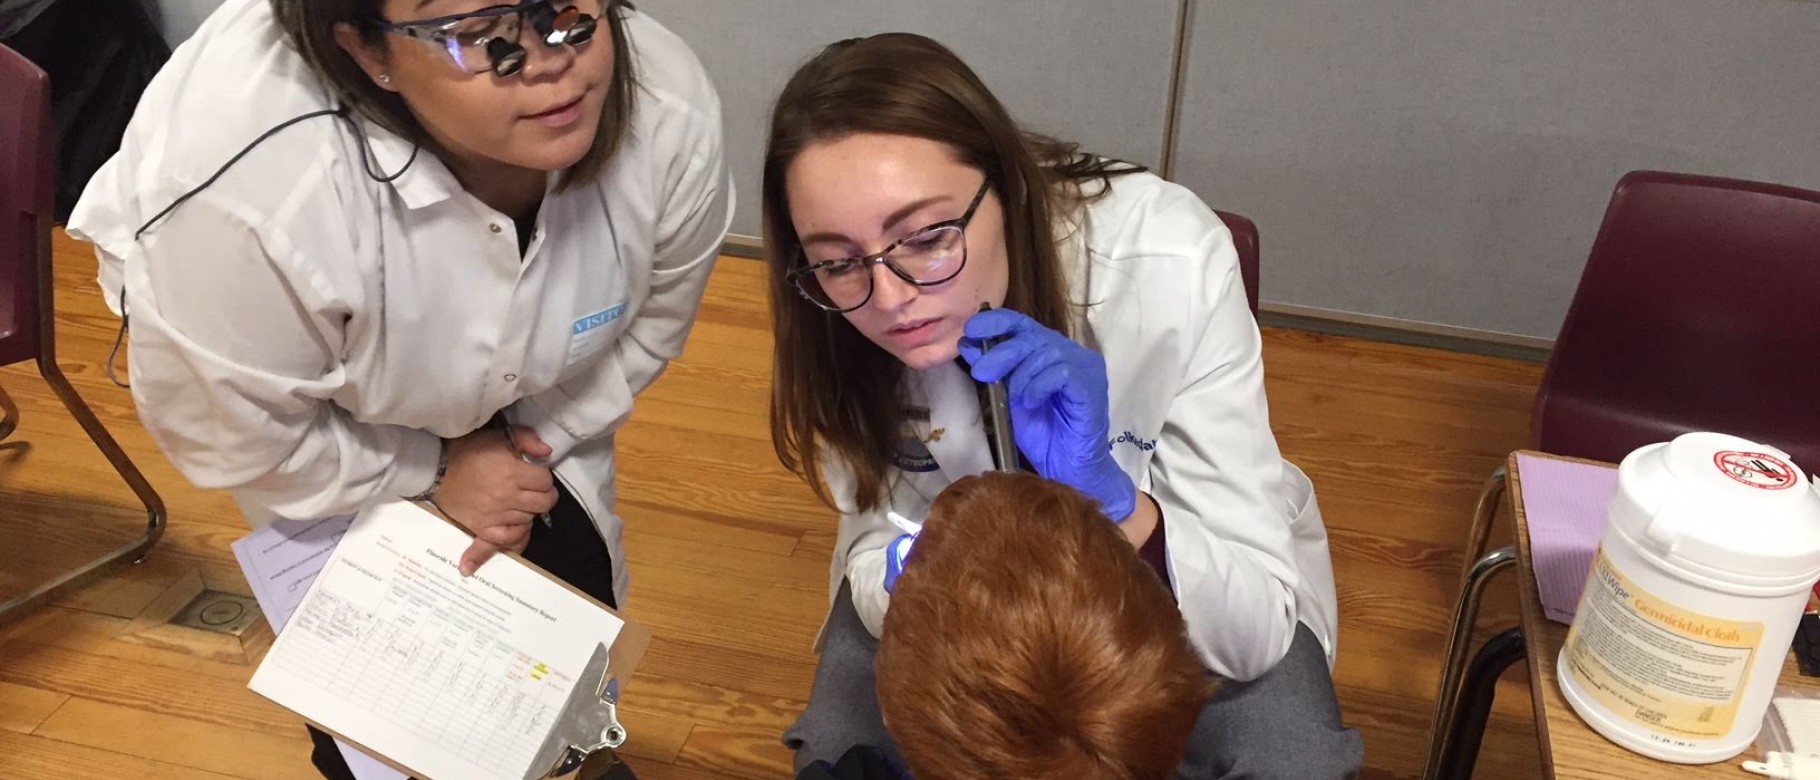 Students are providing screenings and fluoride varnishes to children in underserved rural areas